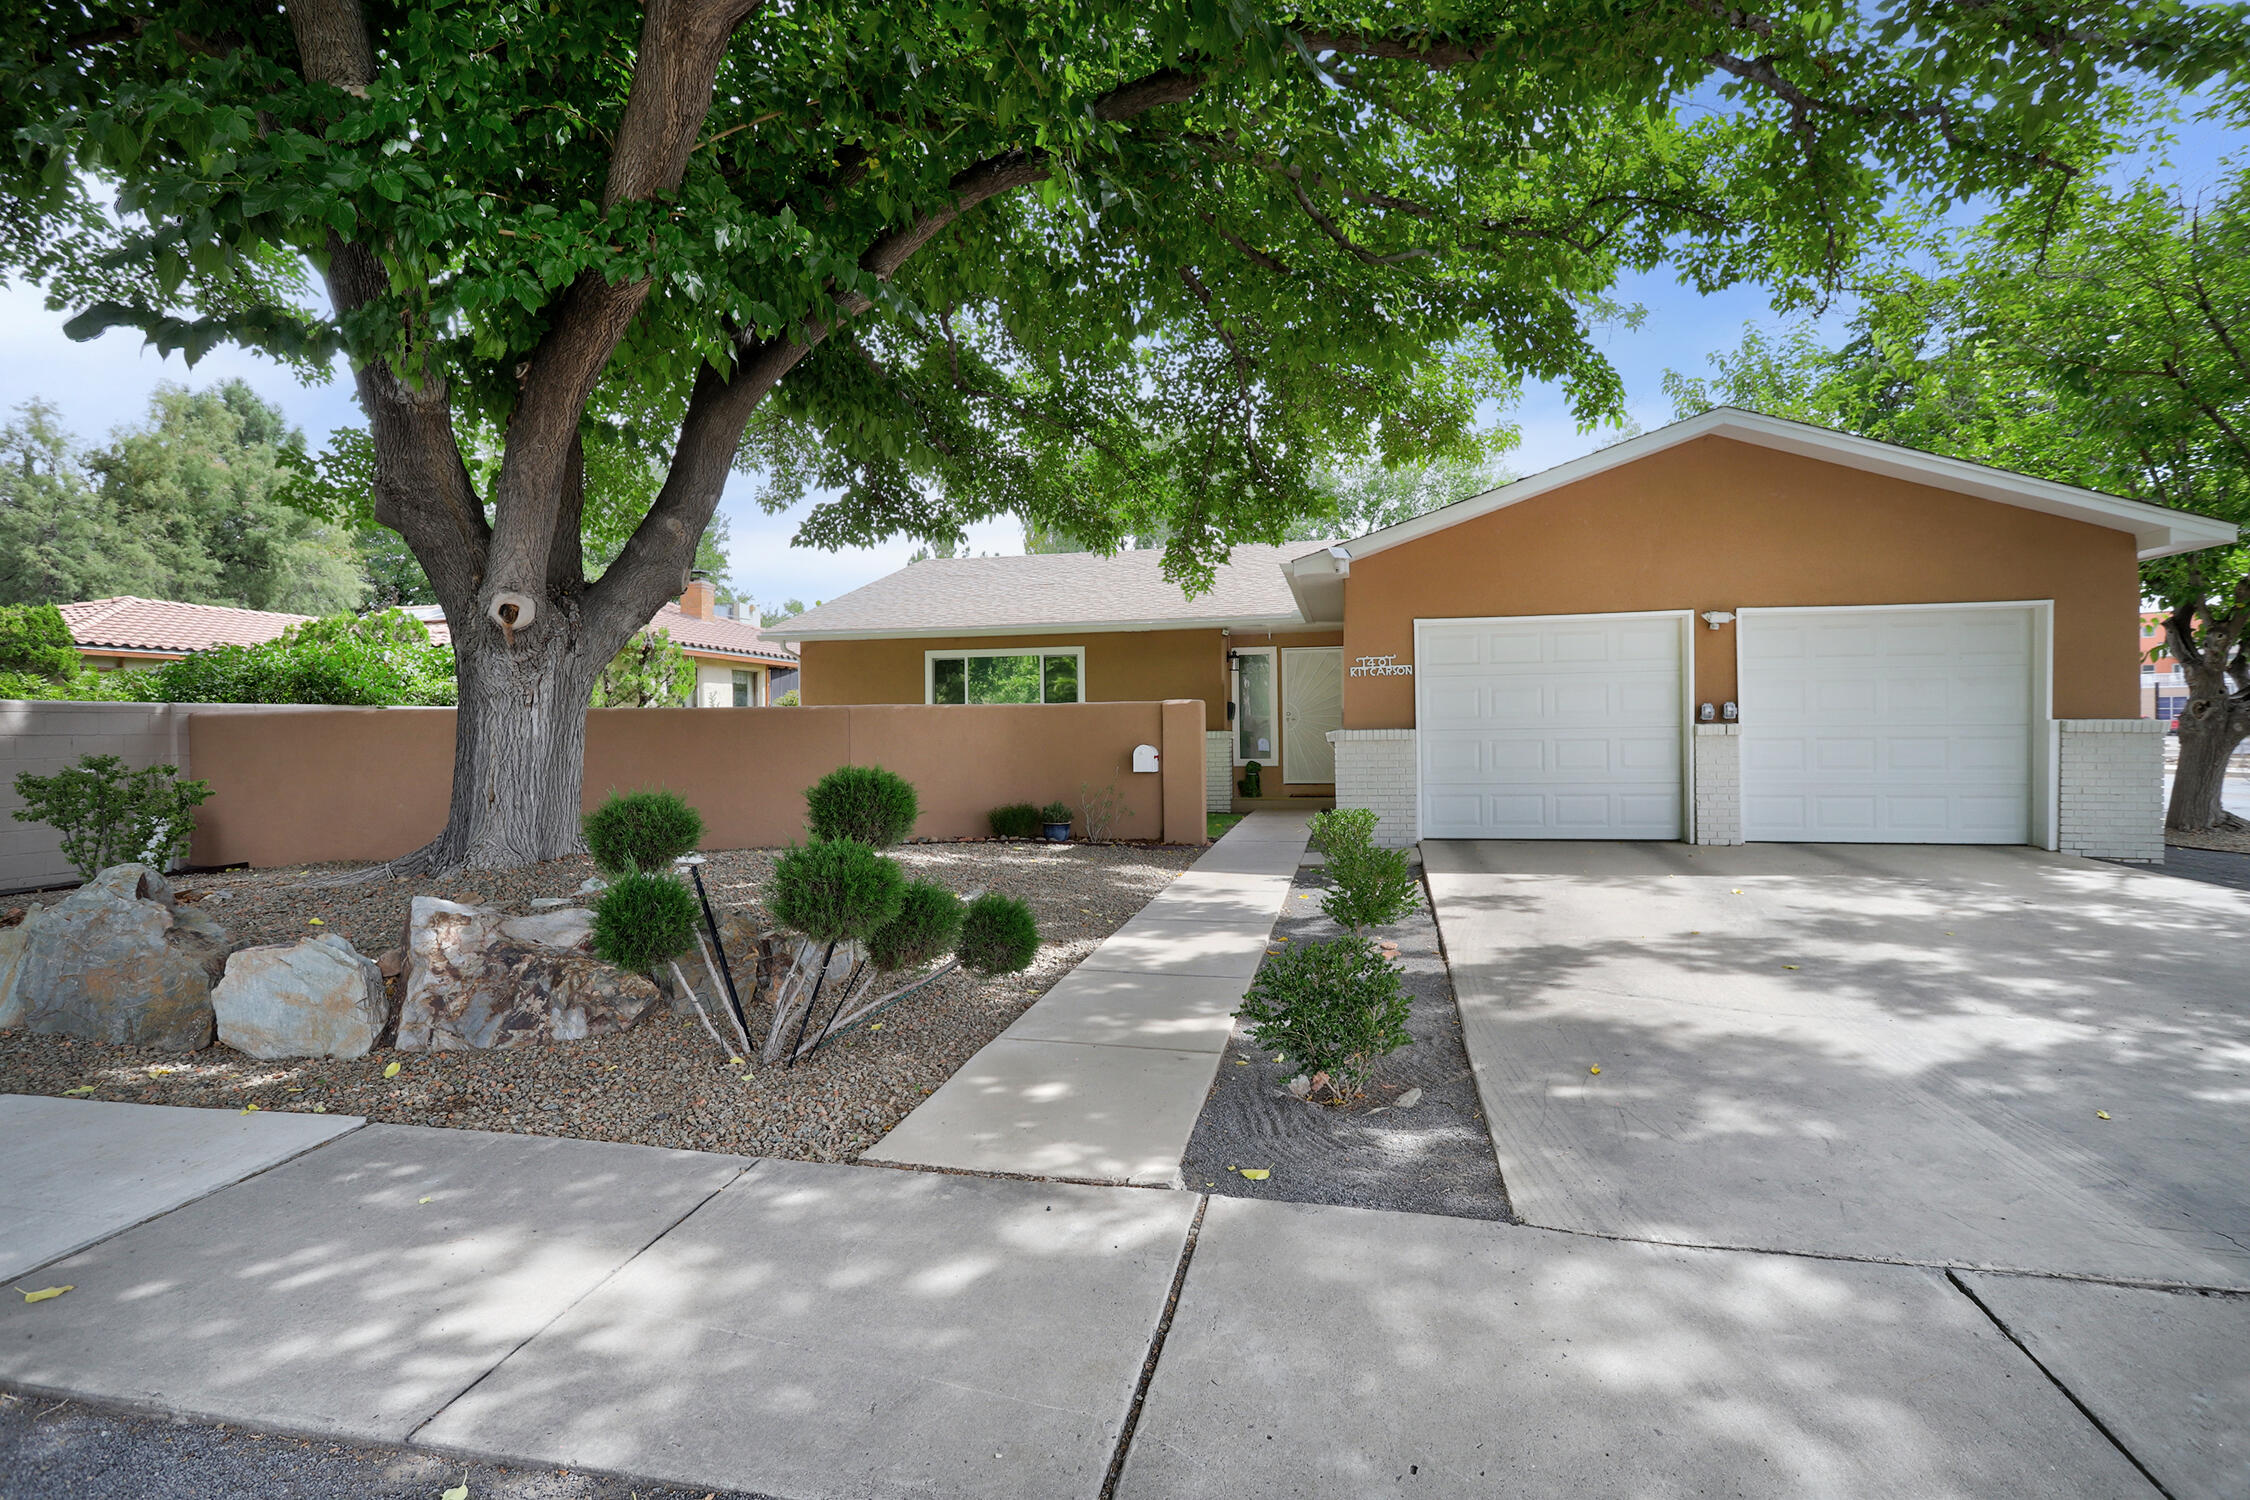 **Seller will contribute 1% toward buydown points with acceptable offer!** Rare opportunity to live under mature trees in ABQ Country Club area across from sprawling Rio Grande Park, a dog park, and w/ nearby access to Rio Grande nature trails. Seller recently spent nearly $60,000 in outstanding upgrades. Special features incl: new courtyd wall & plush front landscaping, new east side walls for privacy, energy-efficient Pella vinyl / thermal windows, enhanced insulation for greater efficiency, new sewer line, hardwood floors or tile throughout (no carpet), modernized kitchen with new cabinets / farm sink / SS appliances / new counters, open concept great room, updated baths, 220 Volt charging ports in garage, and phenomenal outdoor living in the fully-finished bkyd. Hot tub & shed convey